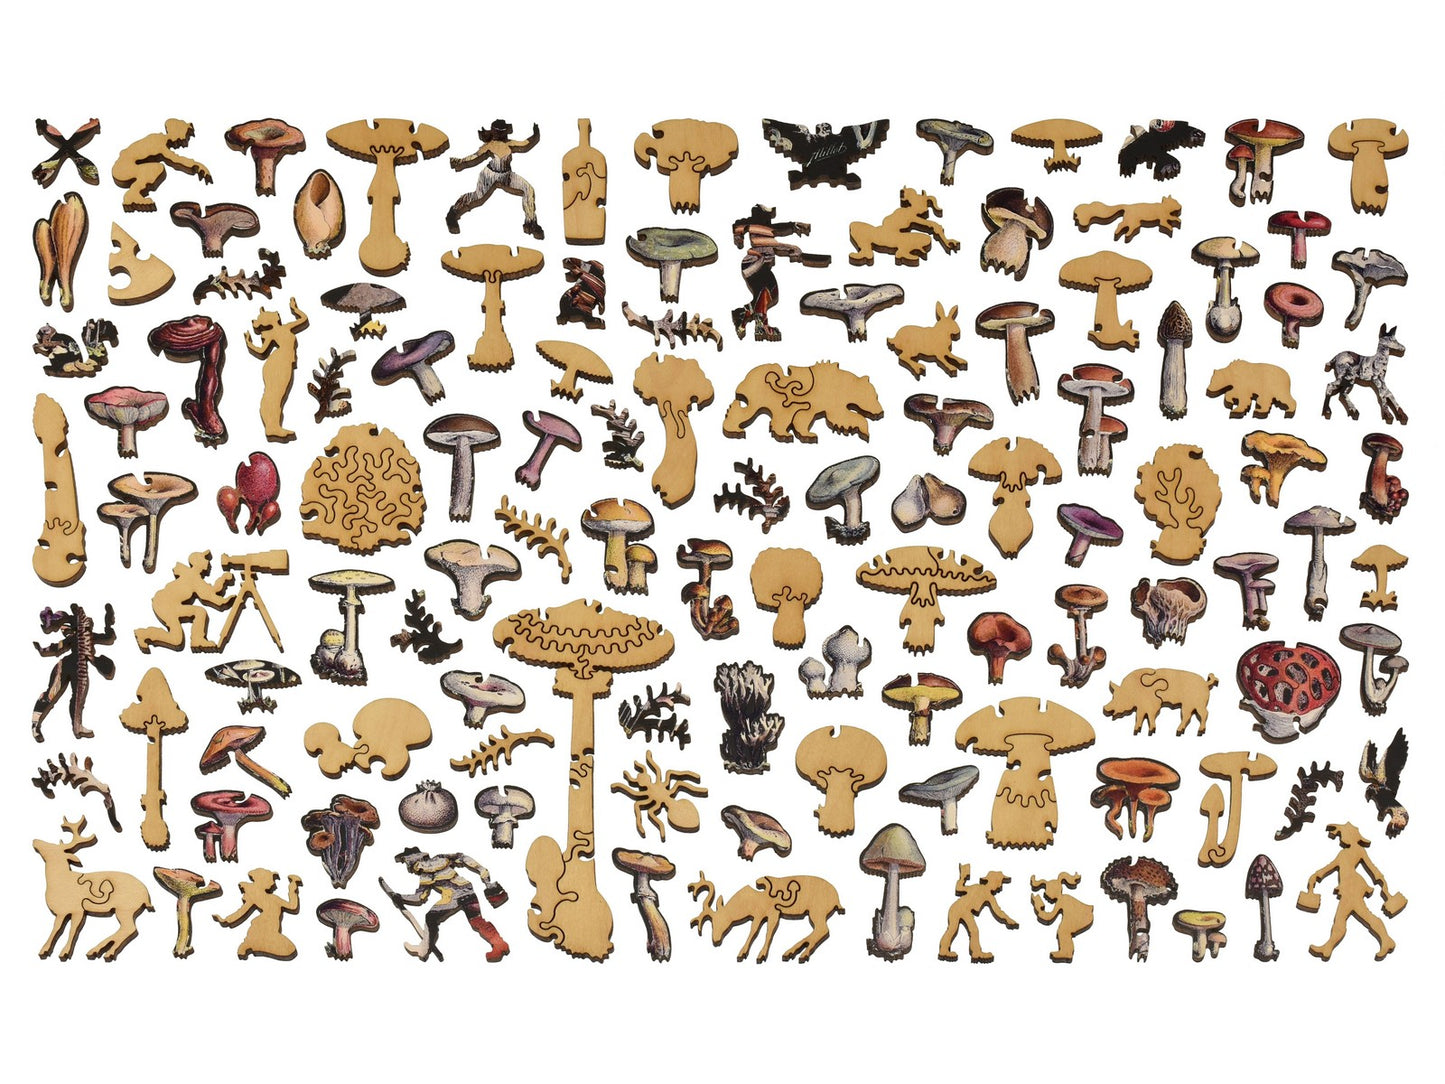 The whimsy pieces that can be found in the puzzle, Mushrooms.